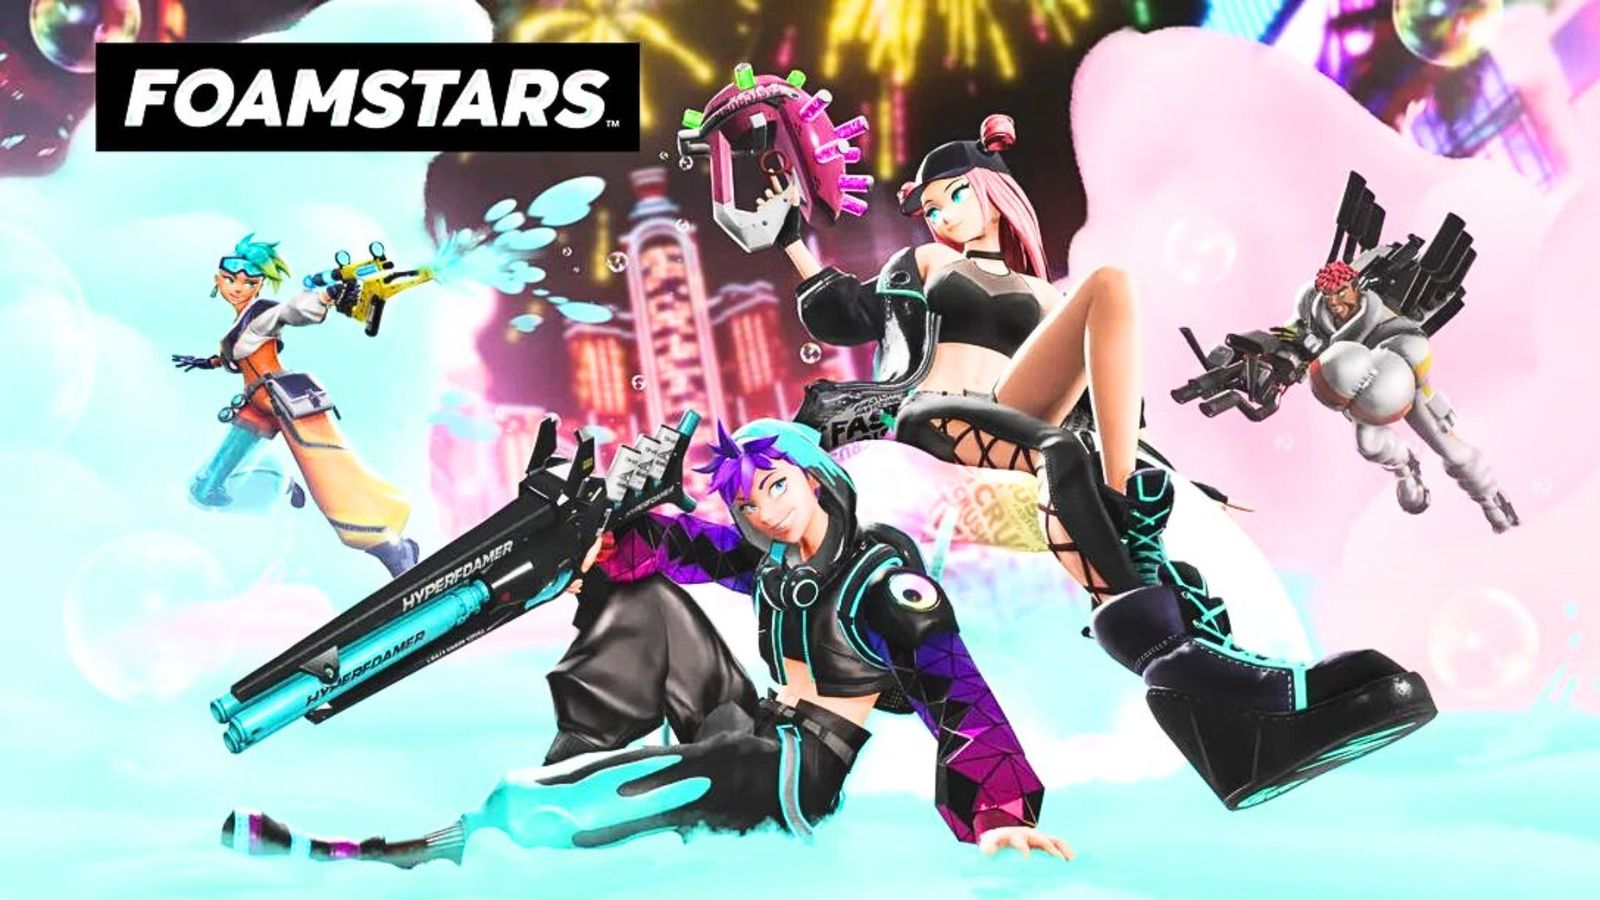 Multiple characters from Square Enix's Foamstars